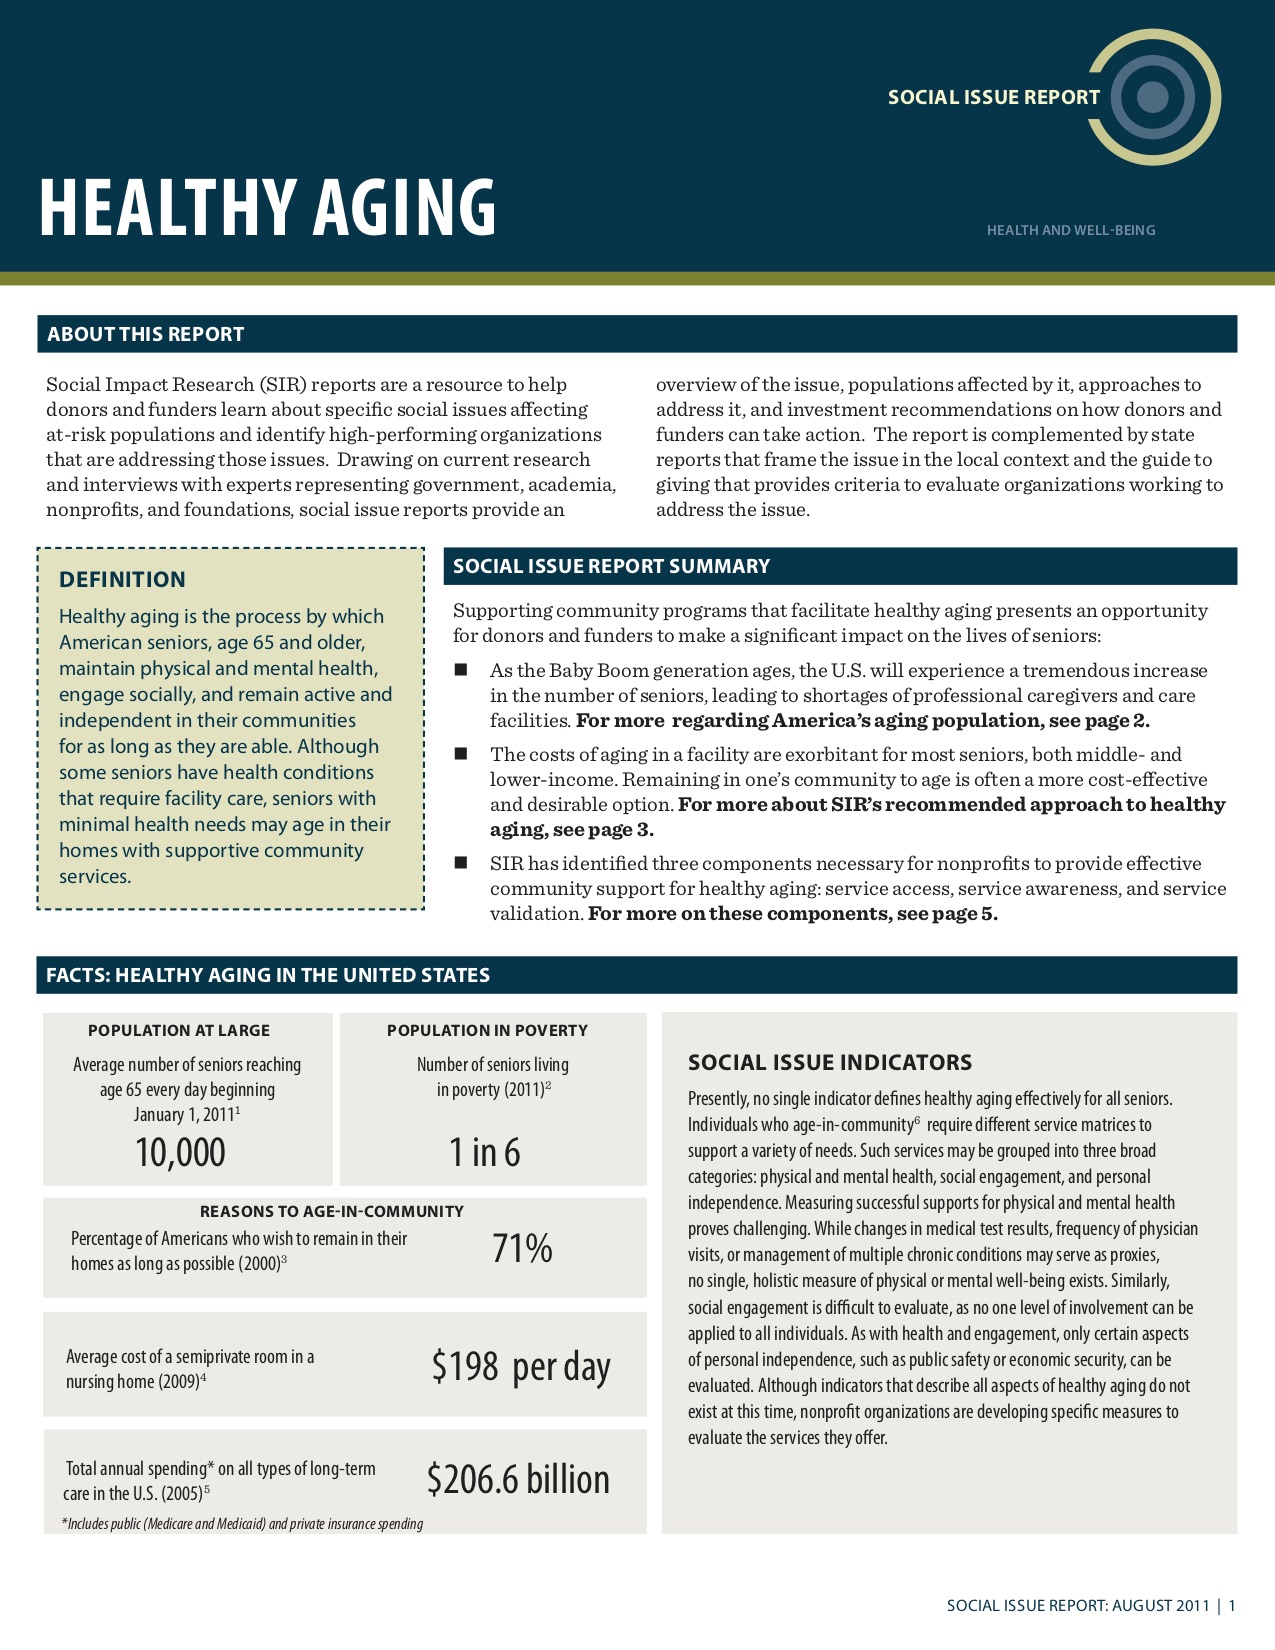 Healthy Aging: Social Issue Report